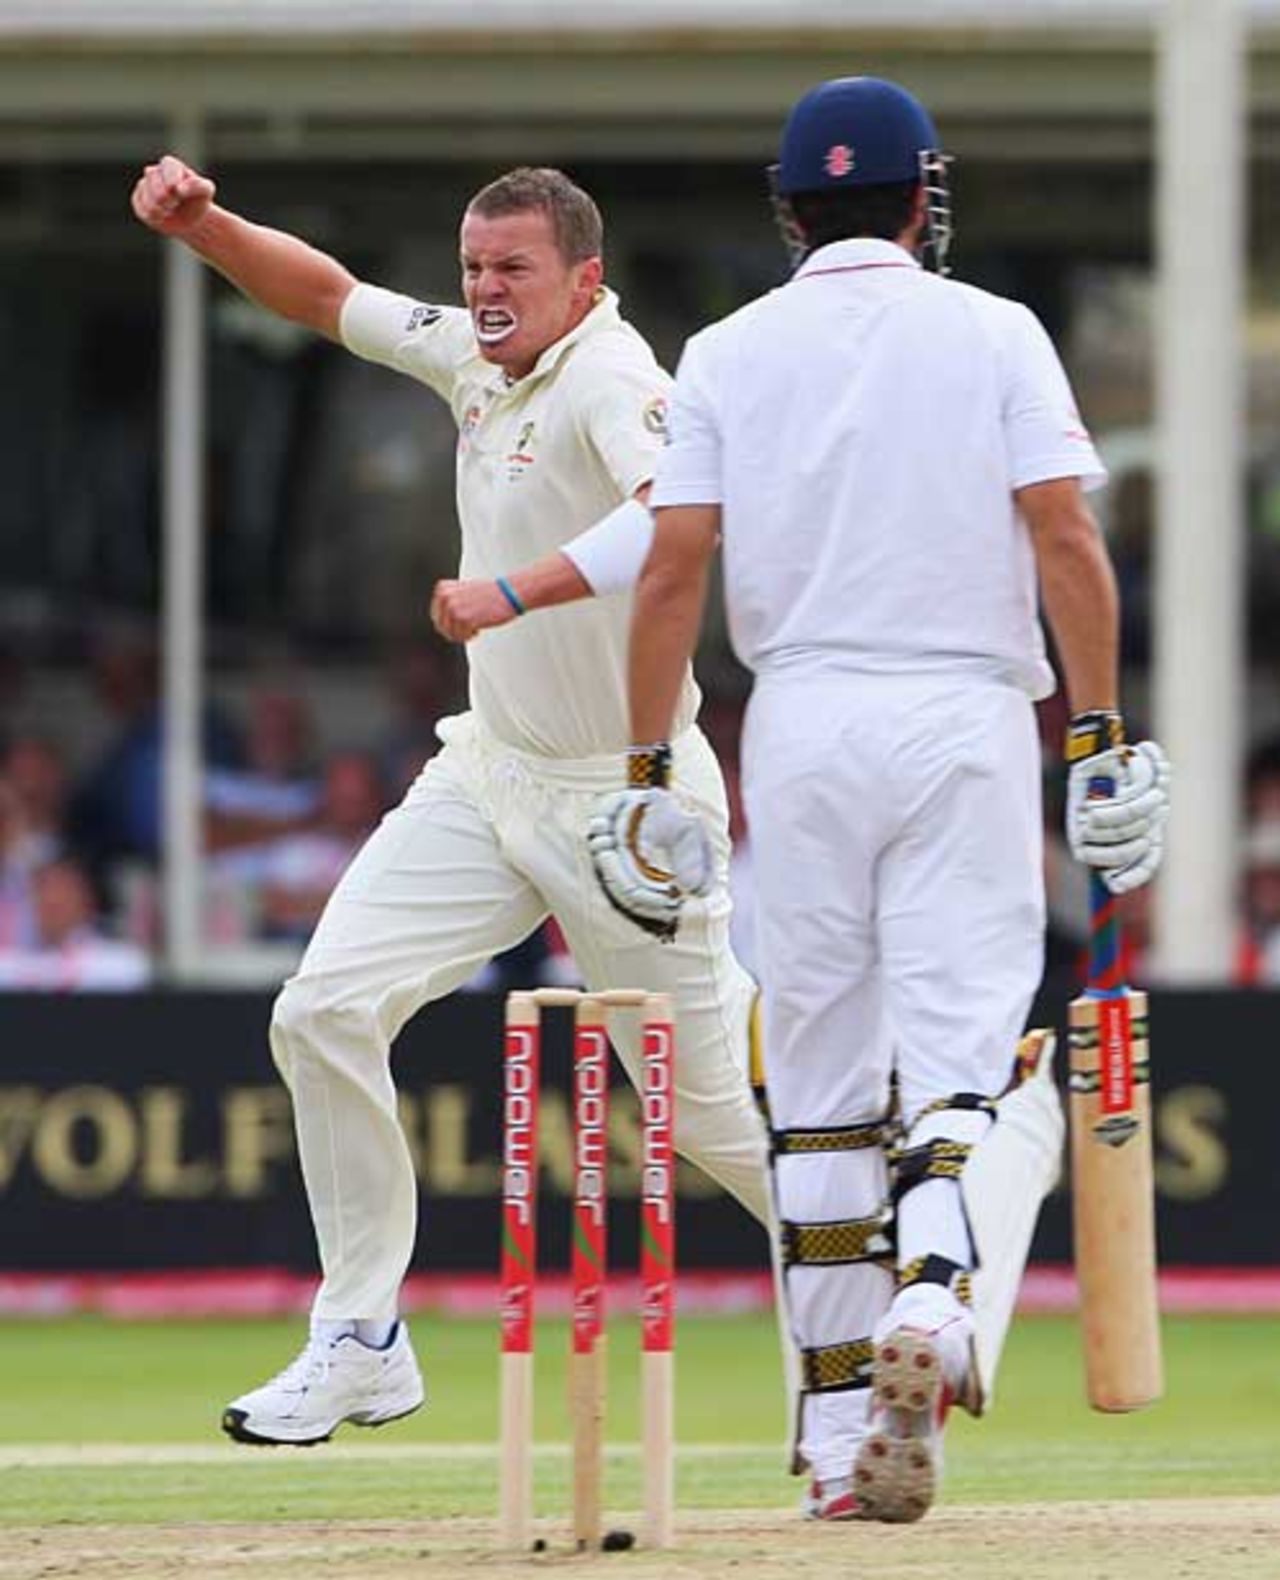 Peter Siddle gave Australia an early breakthrough when he remove Alastair Cook, England v Australia, 3rd Test, Edgbaston, 2nd day, July 31, 2009